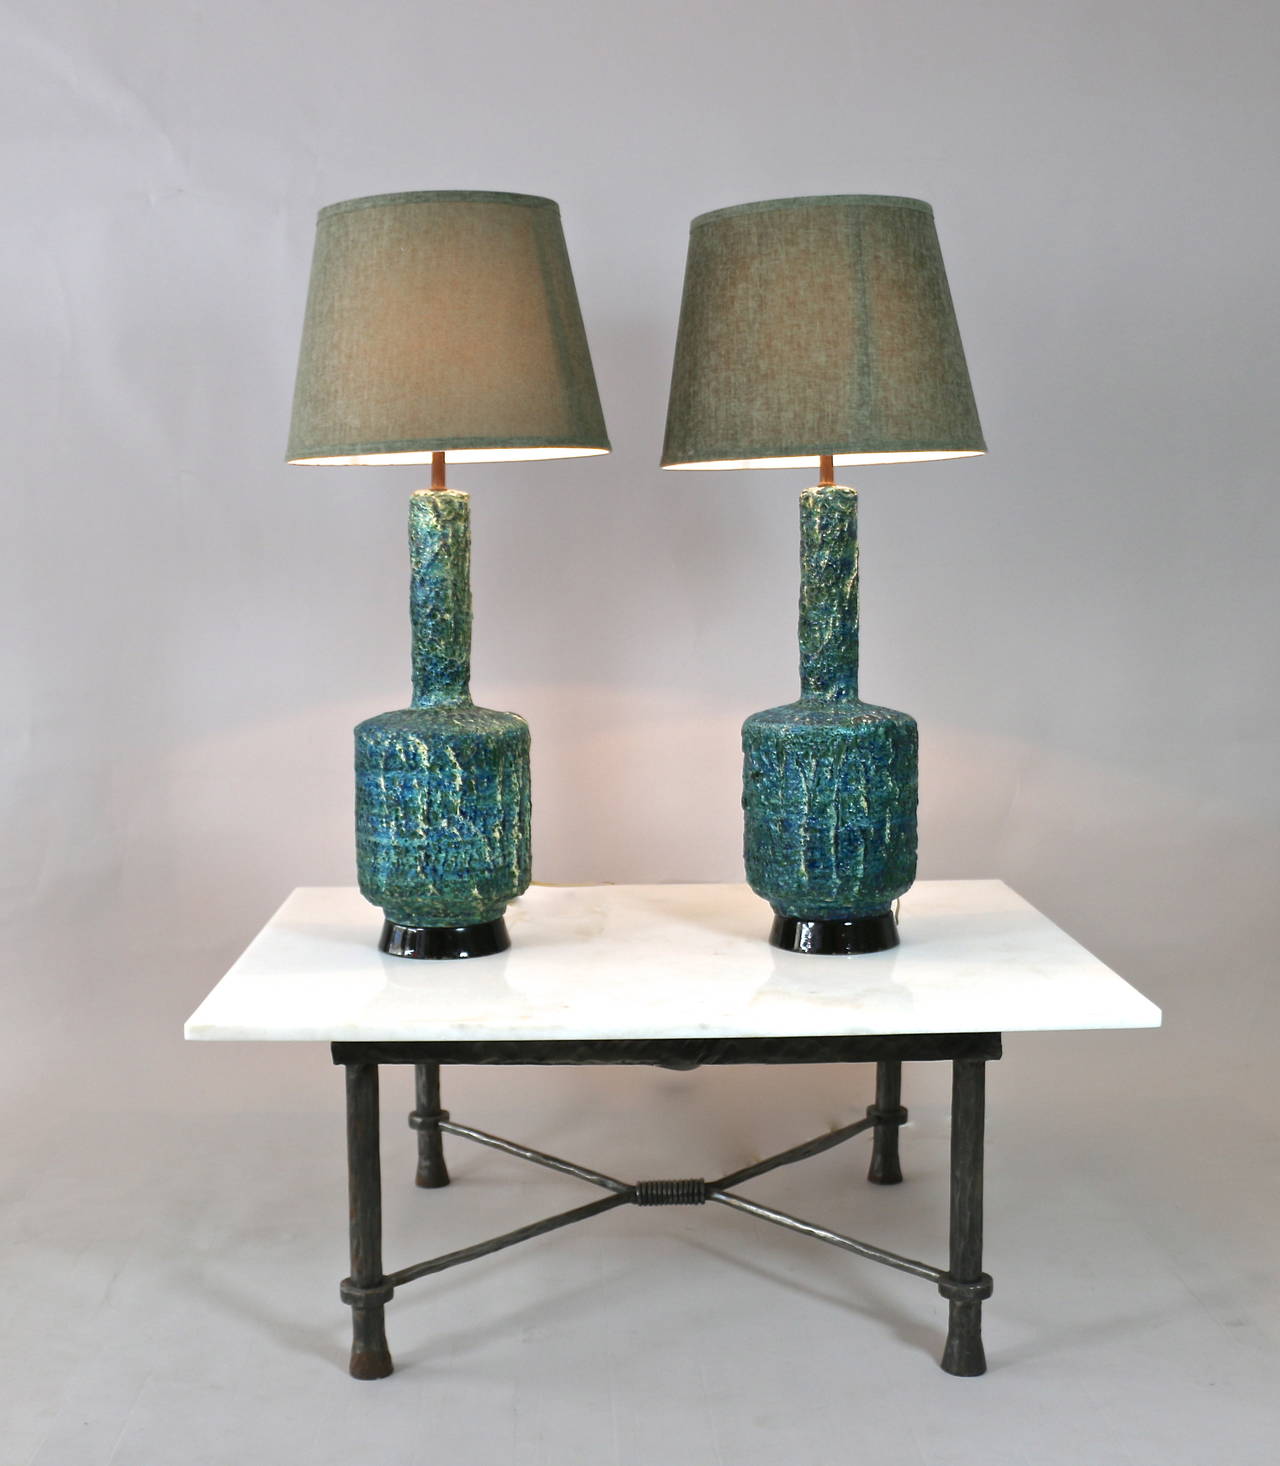 F.A.I.P. Manufacture. 1970s pair of ceramic table lamps.